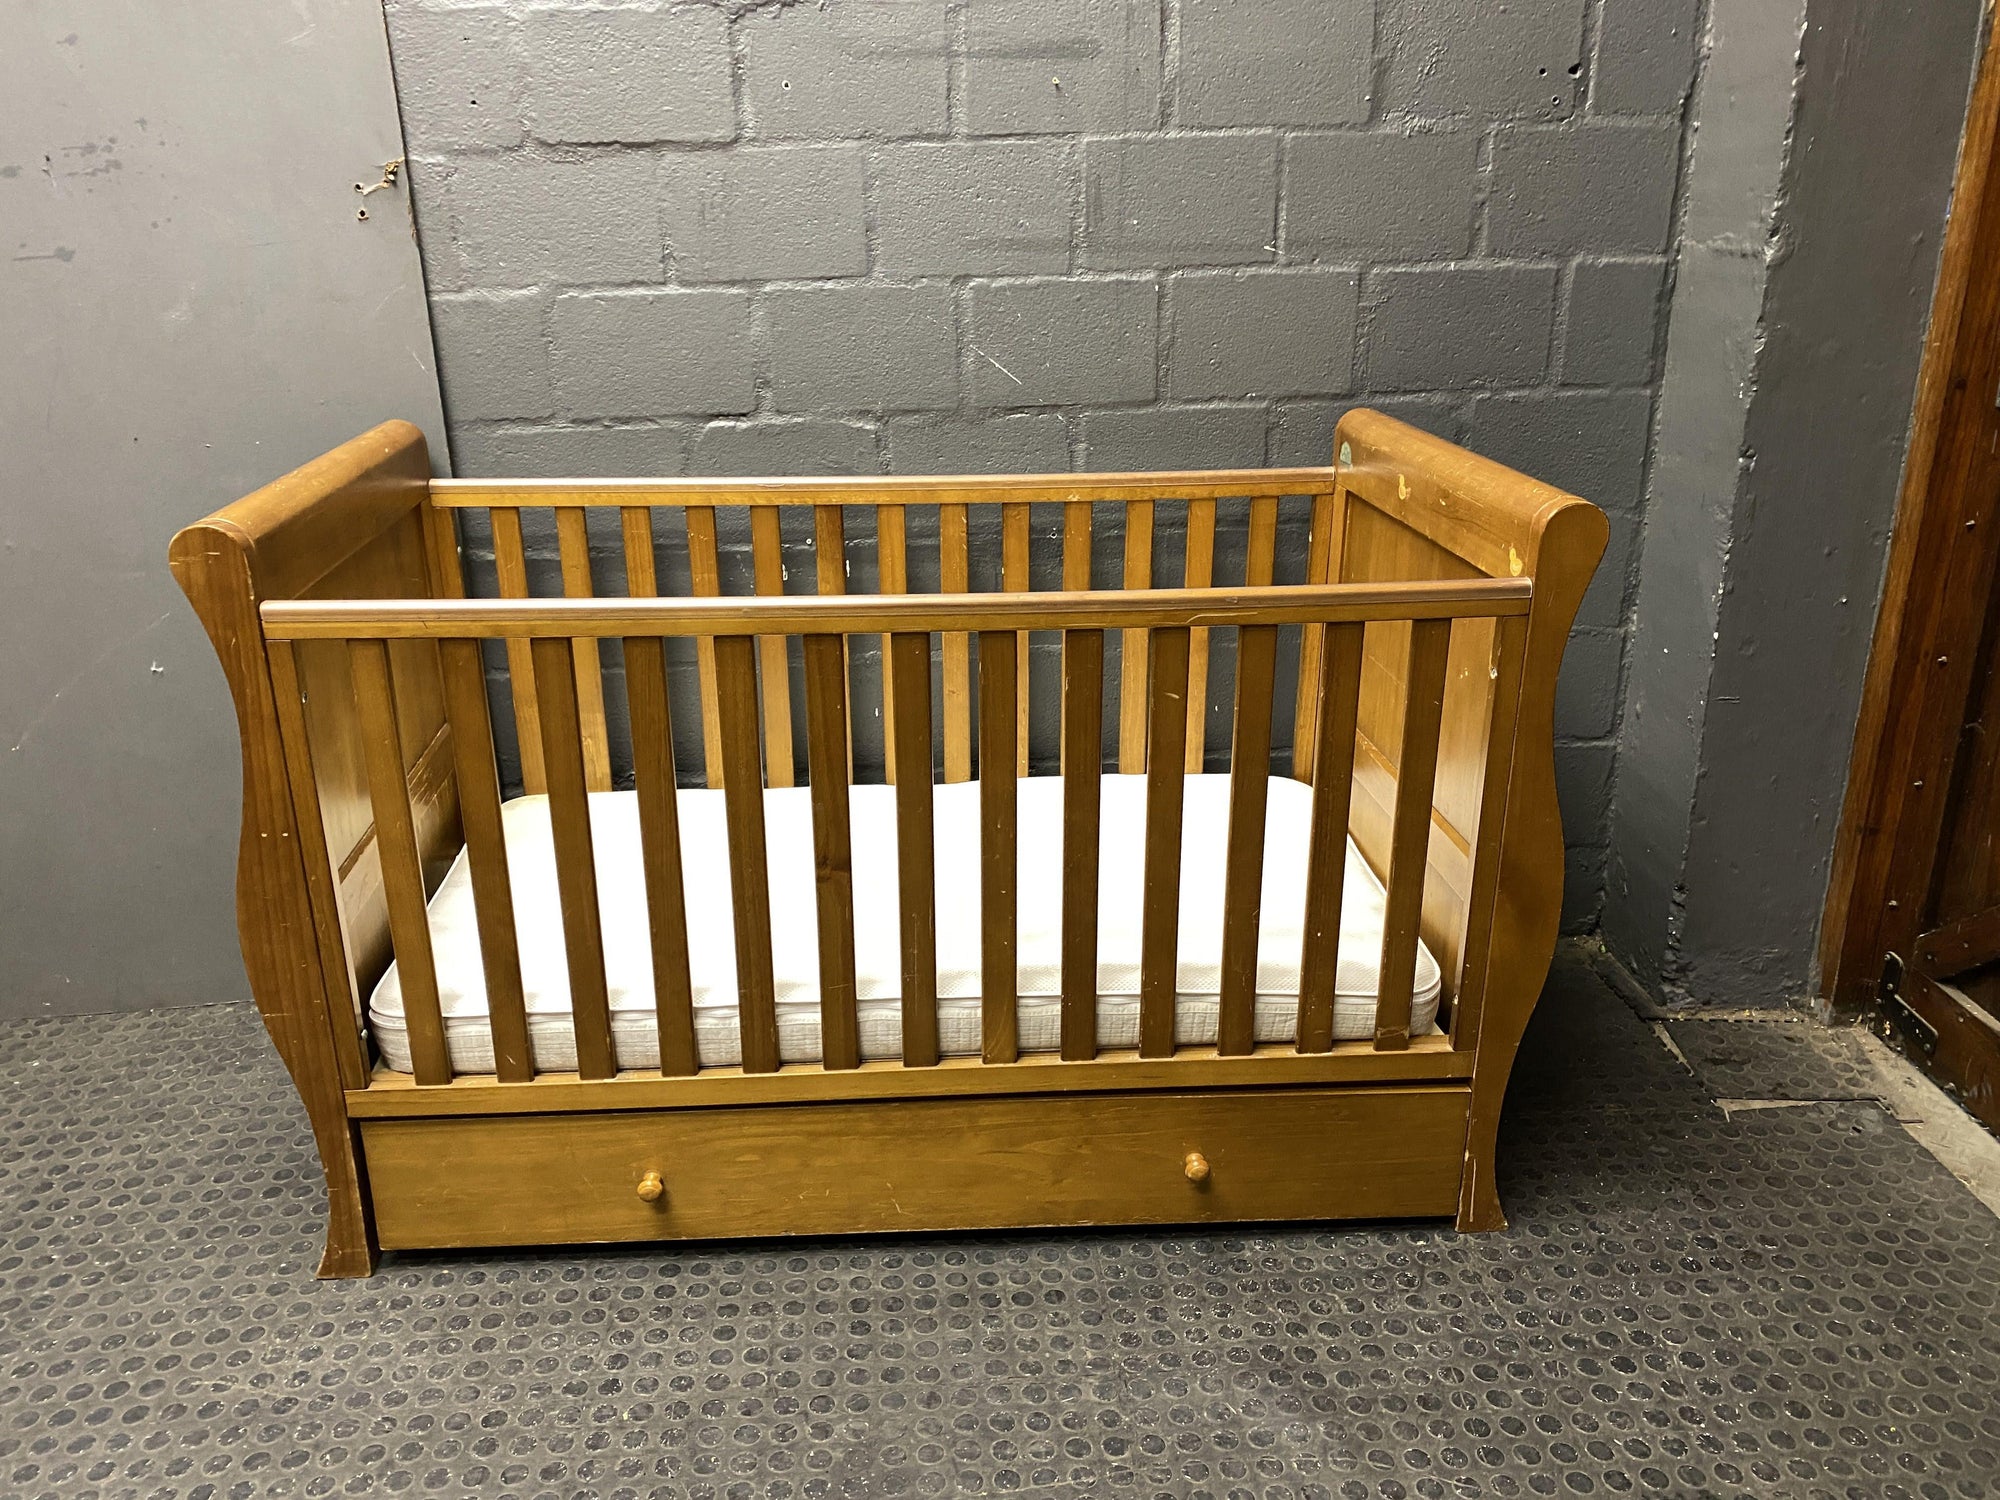 Brown Wooden Cot Bed(Drawers)-Reduced